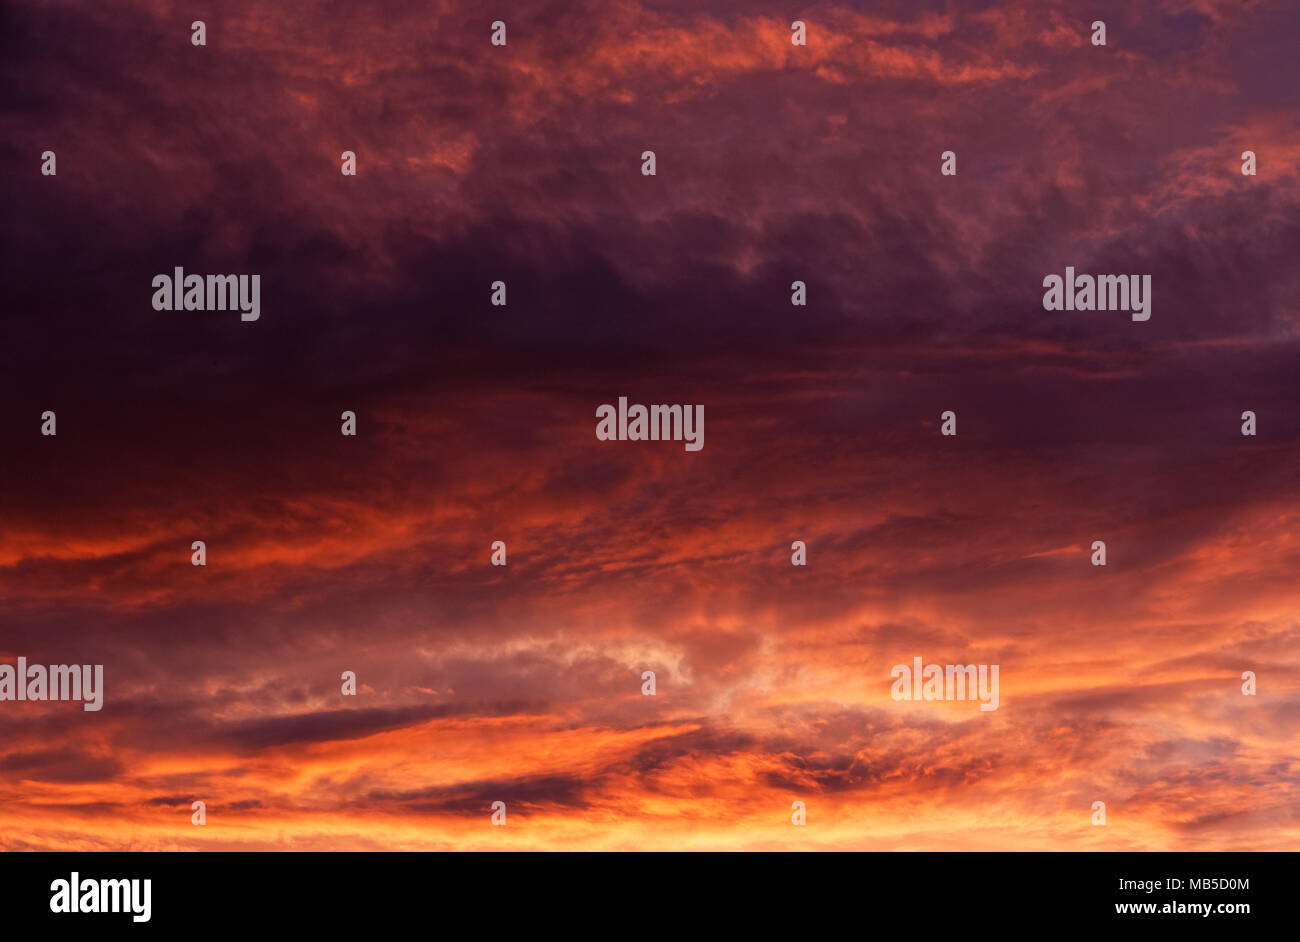 Dramatic sunset sky with evening sky clouds lit by bright sunlight Stock Photo